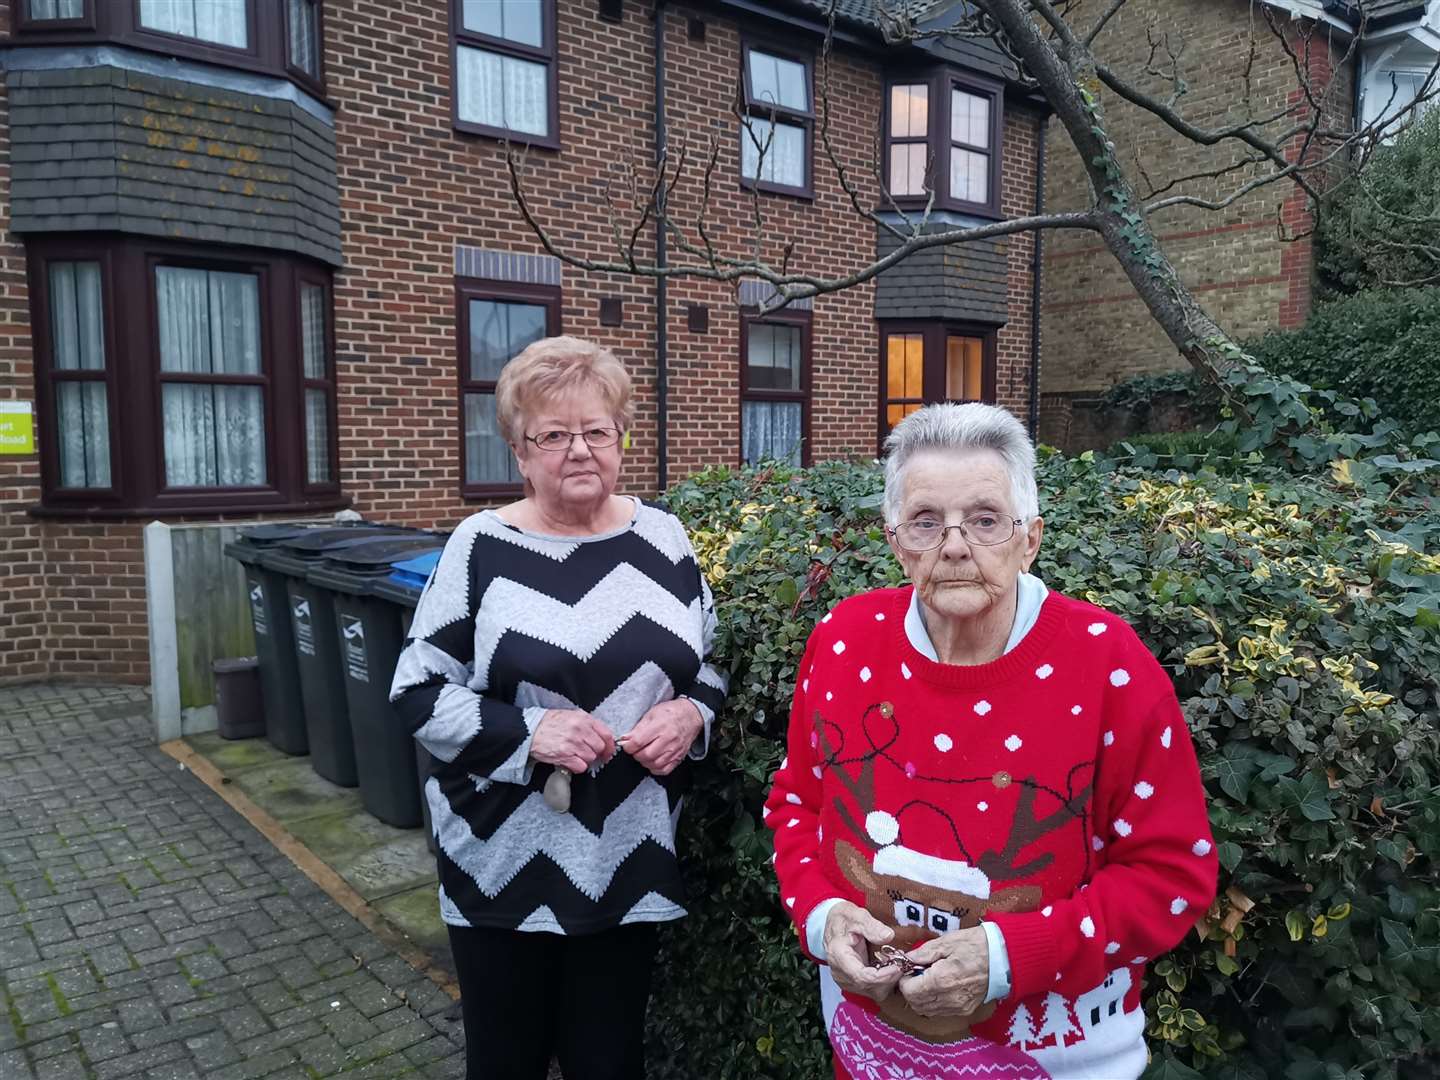 Irene Swan and May Divers were told to take the lights down from the hedge outside their retirement apartments